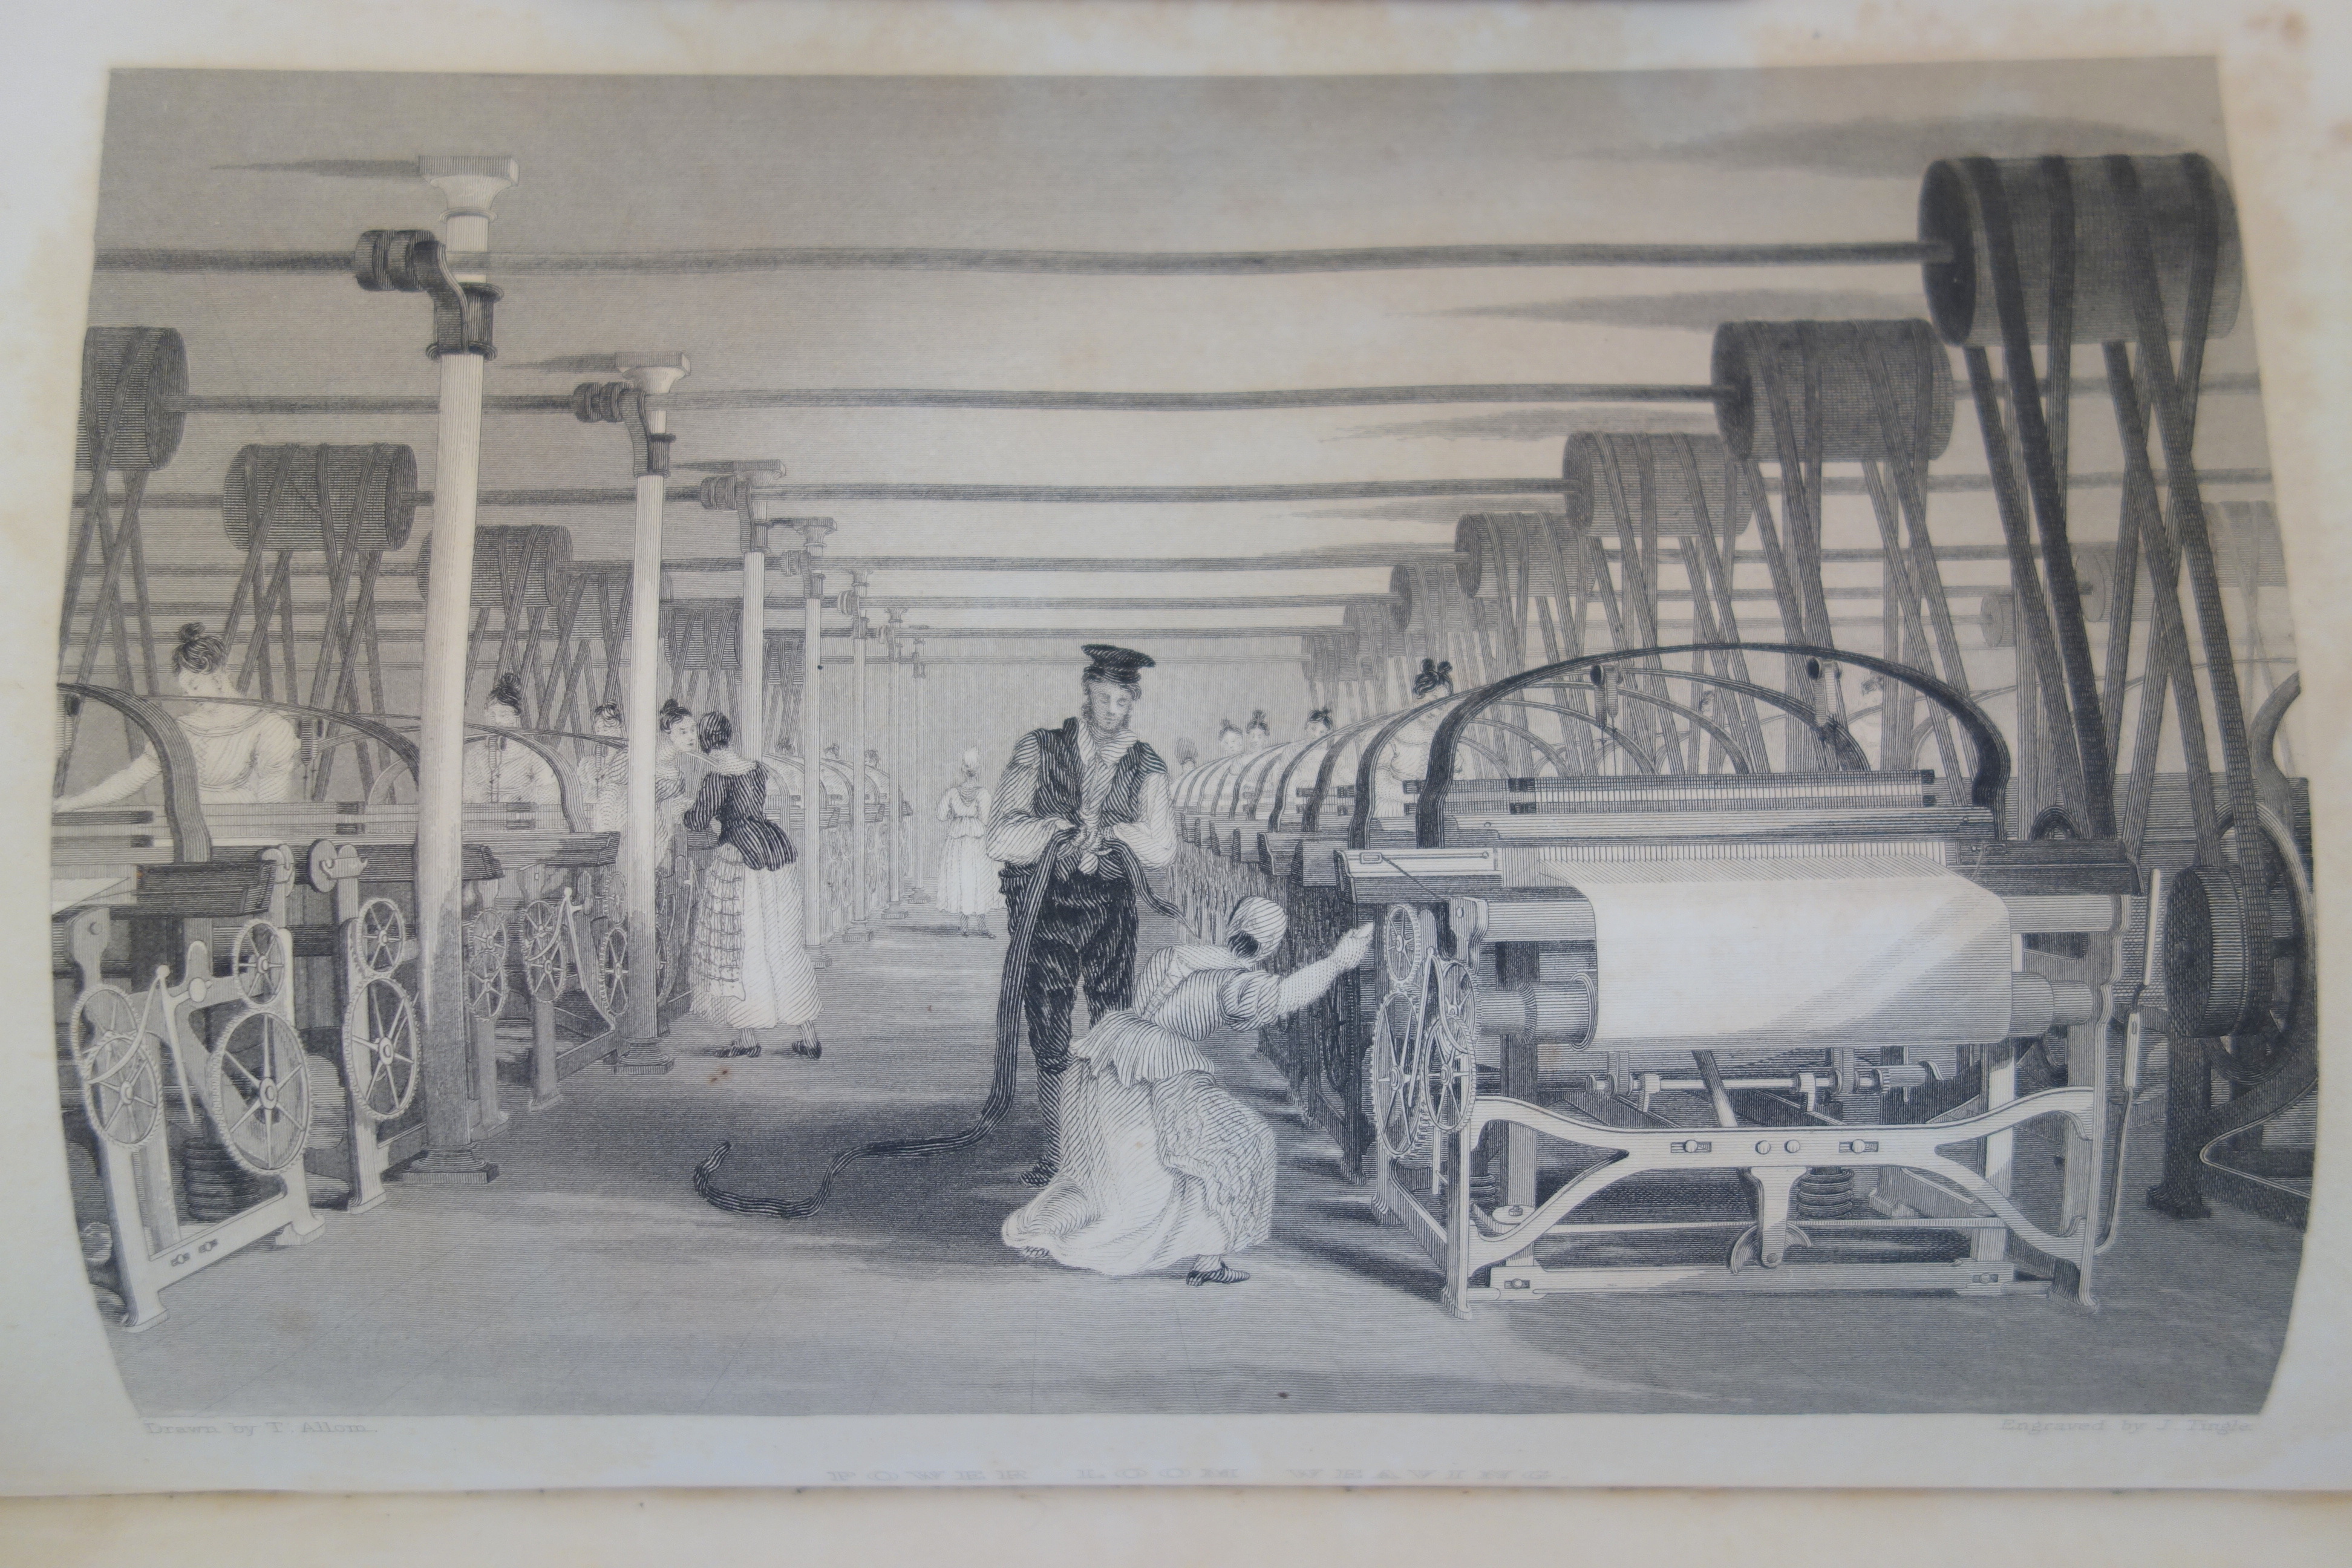 The Roberts iron power looms shown here were mainly operated by women and children. From Baines,  History of the Cotton Manufacture in Great Britain (1835).